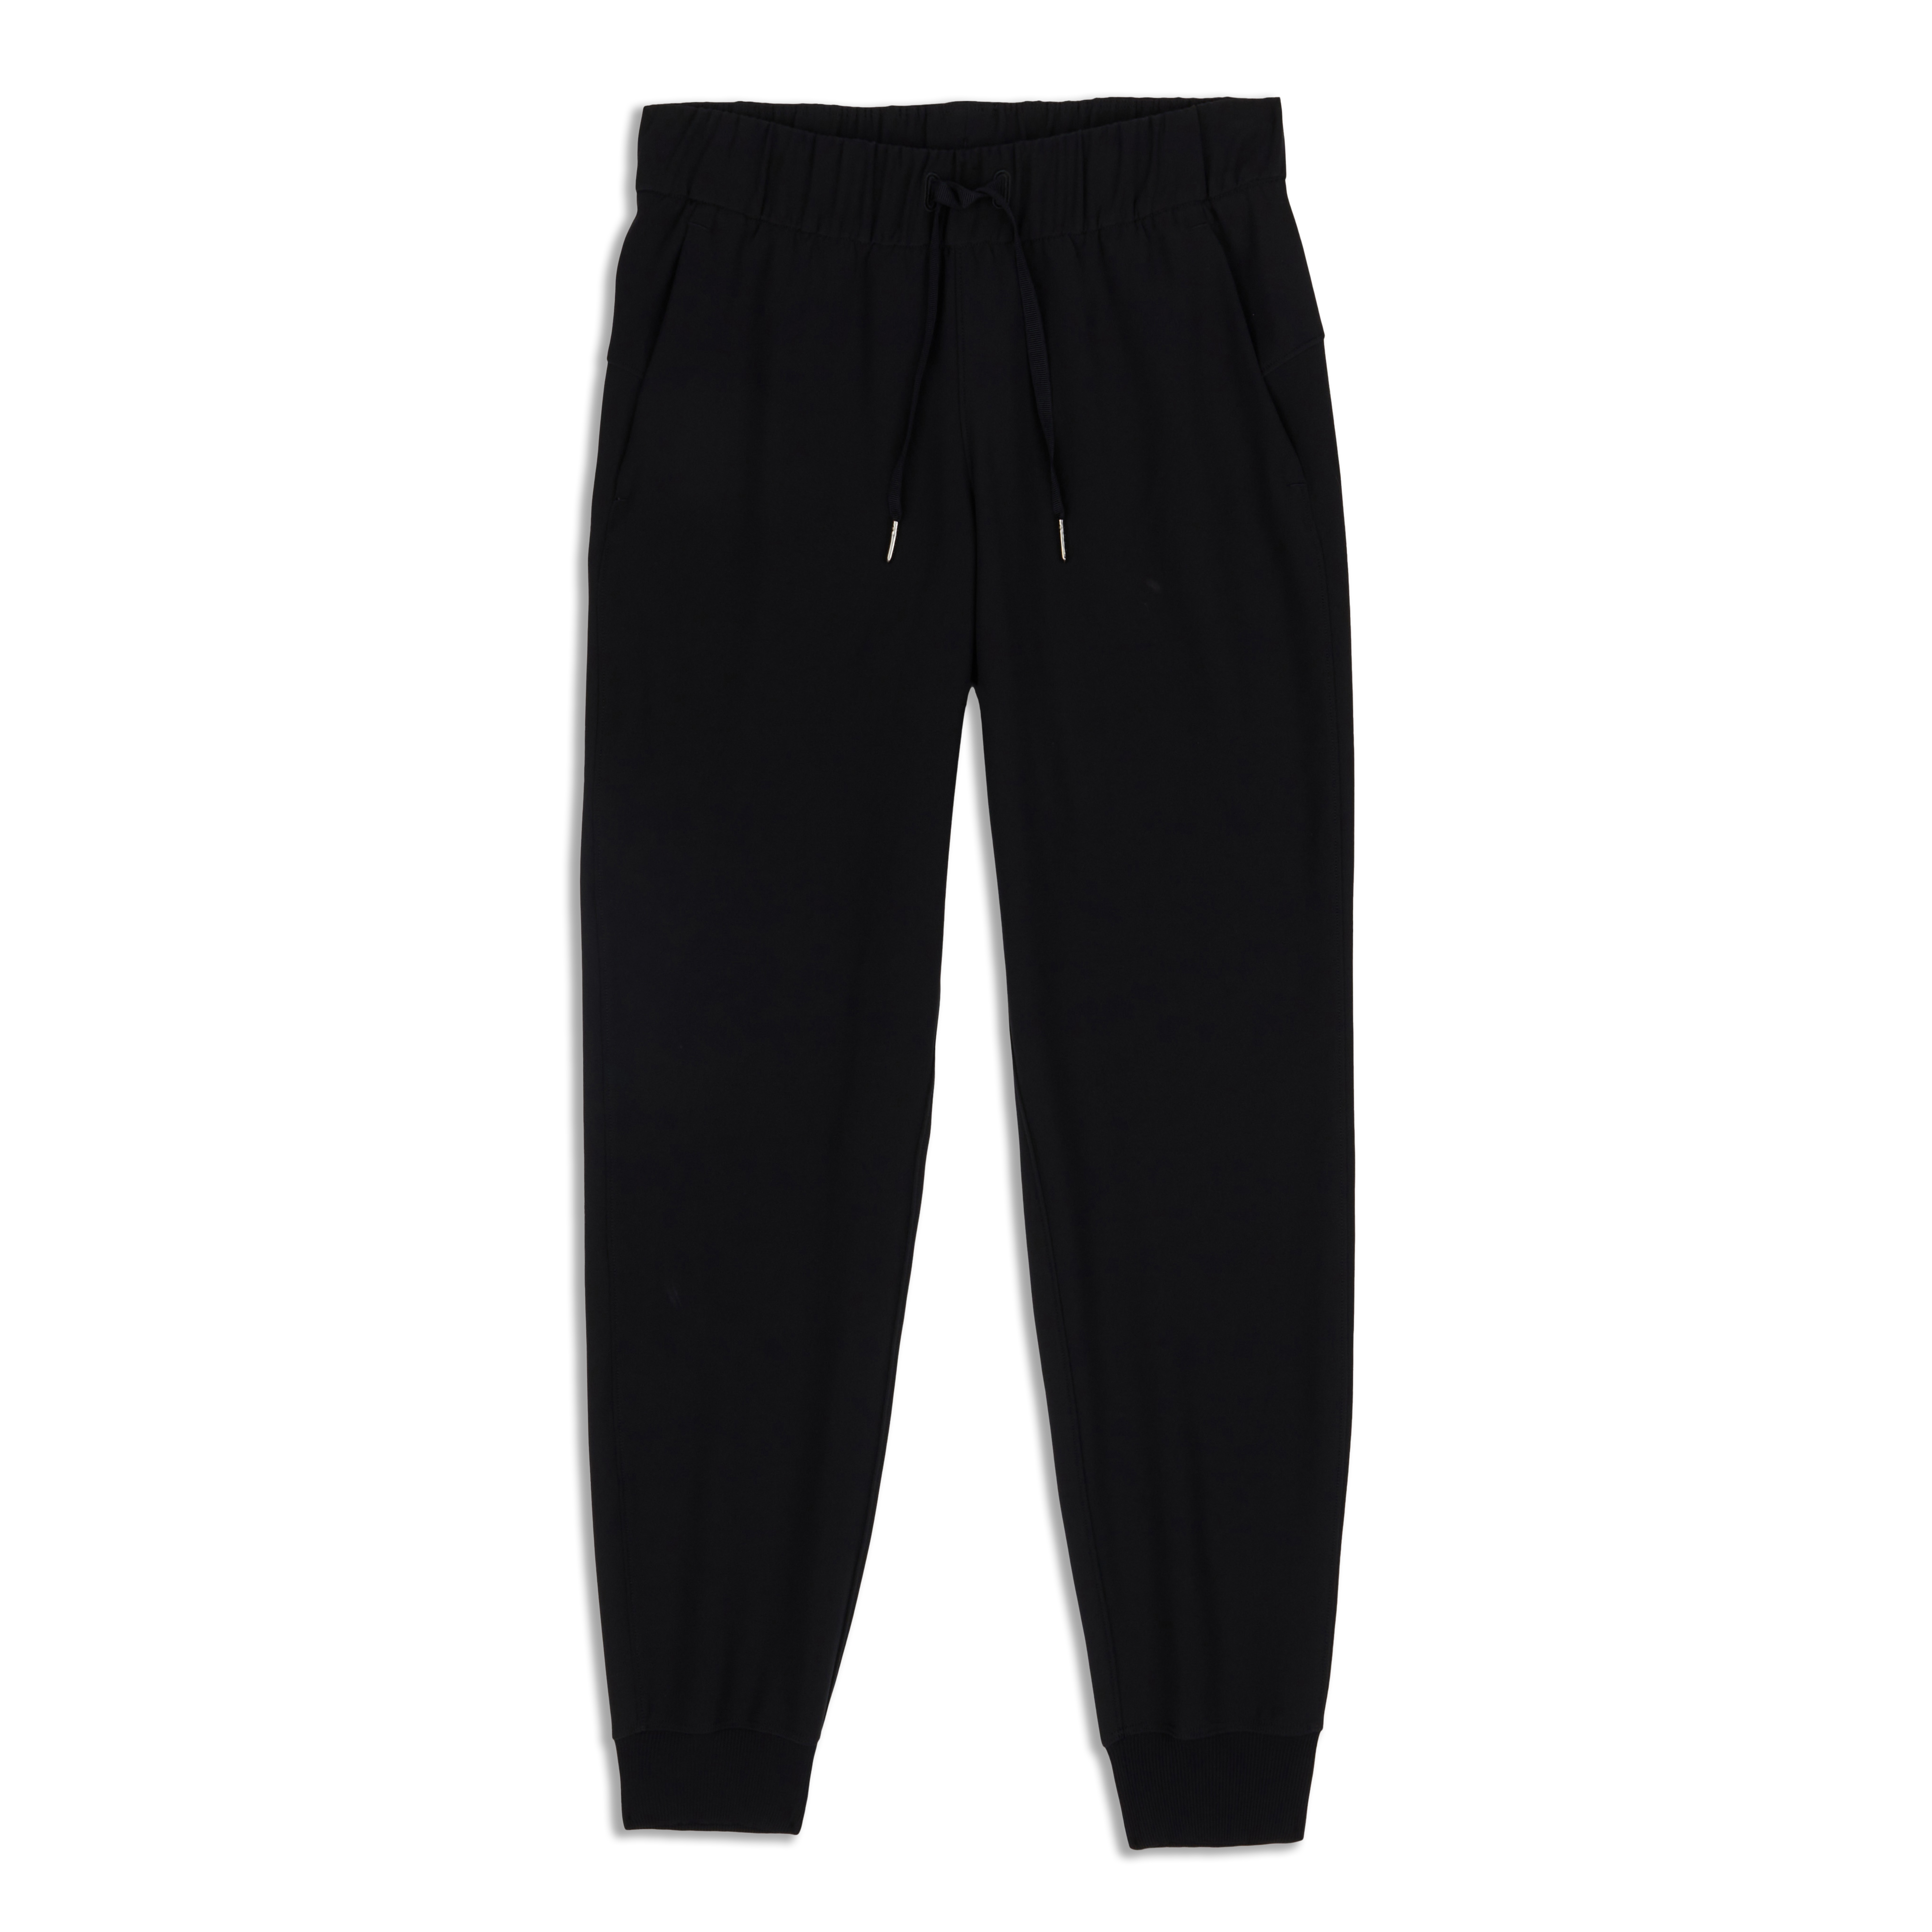 Lululemon On the Fly Jogger 28 *Woven - In Cassis and Light Grey